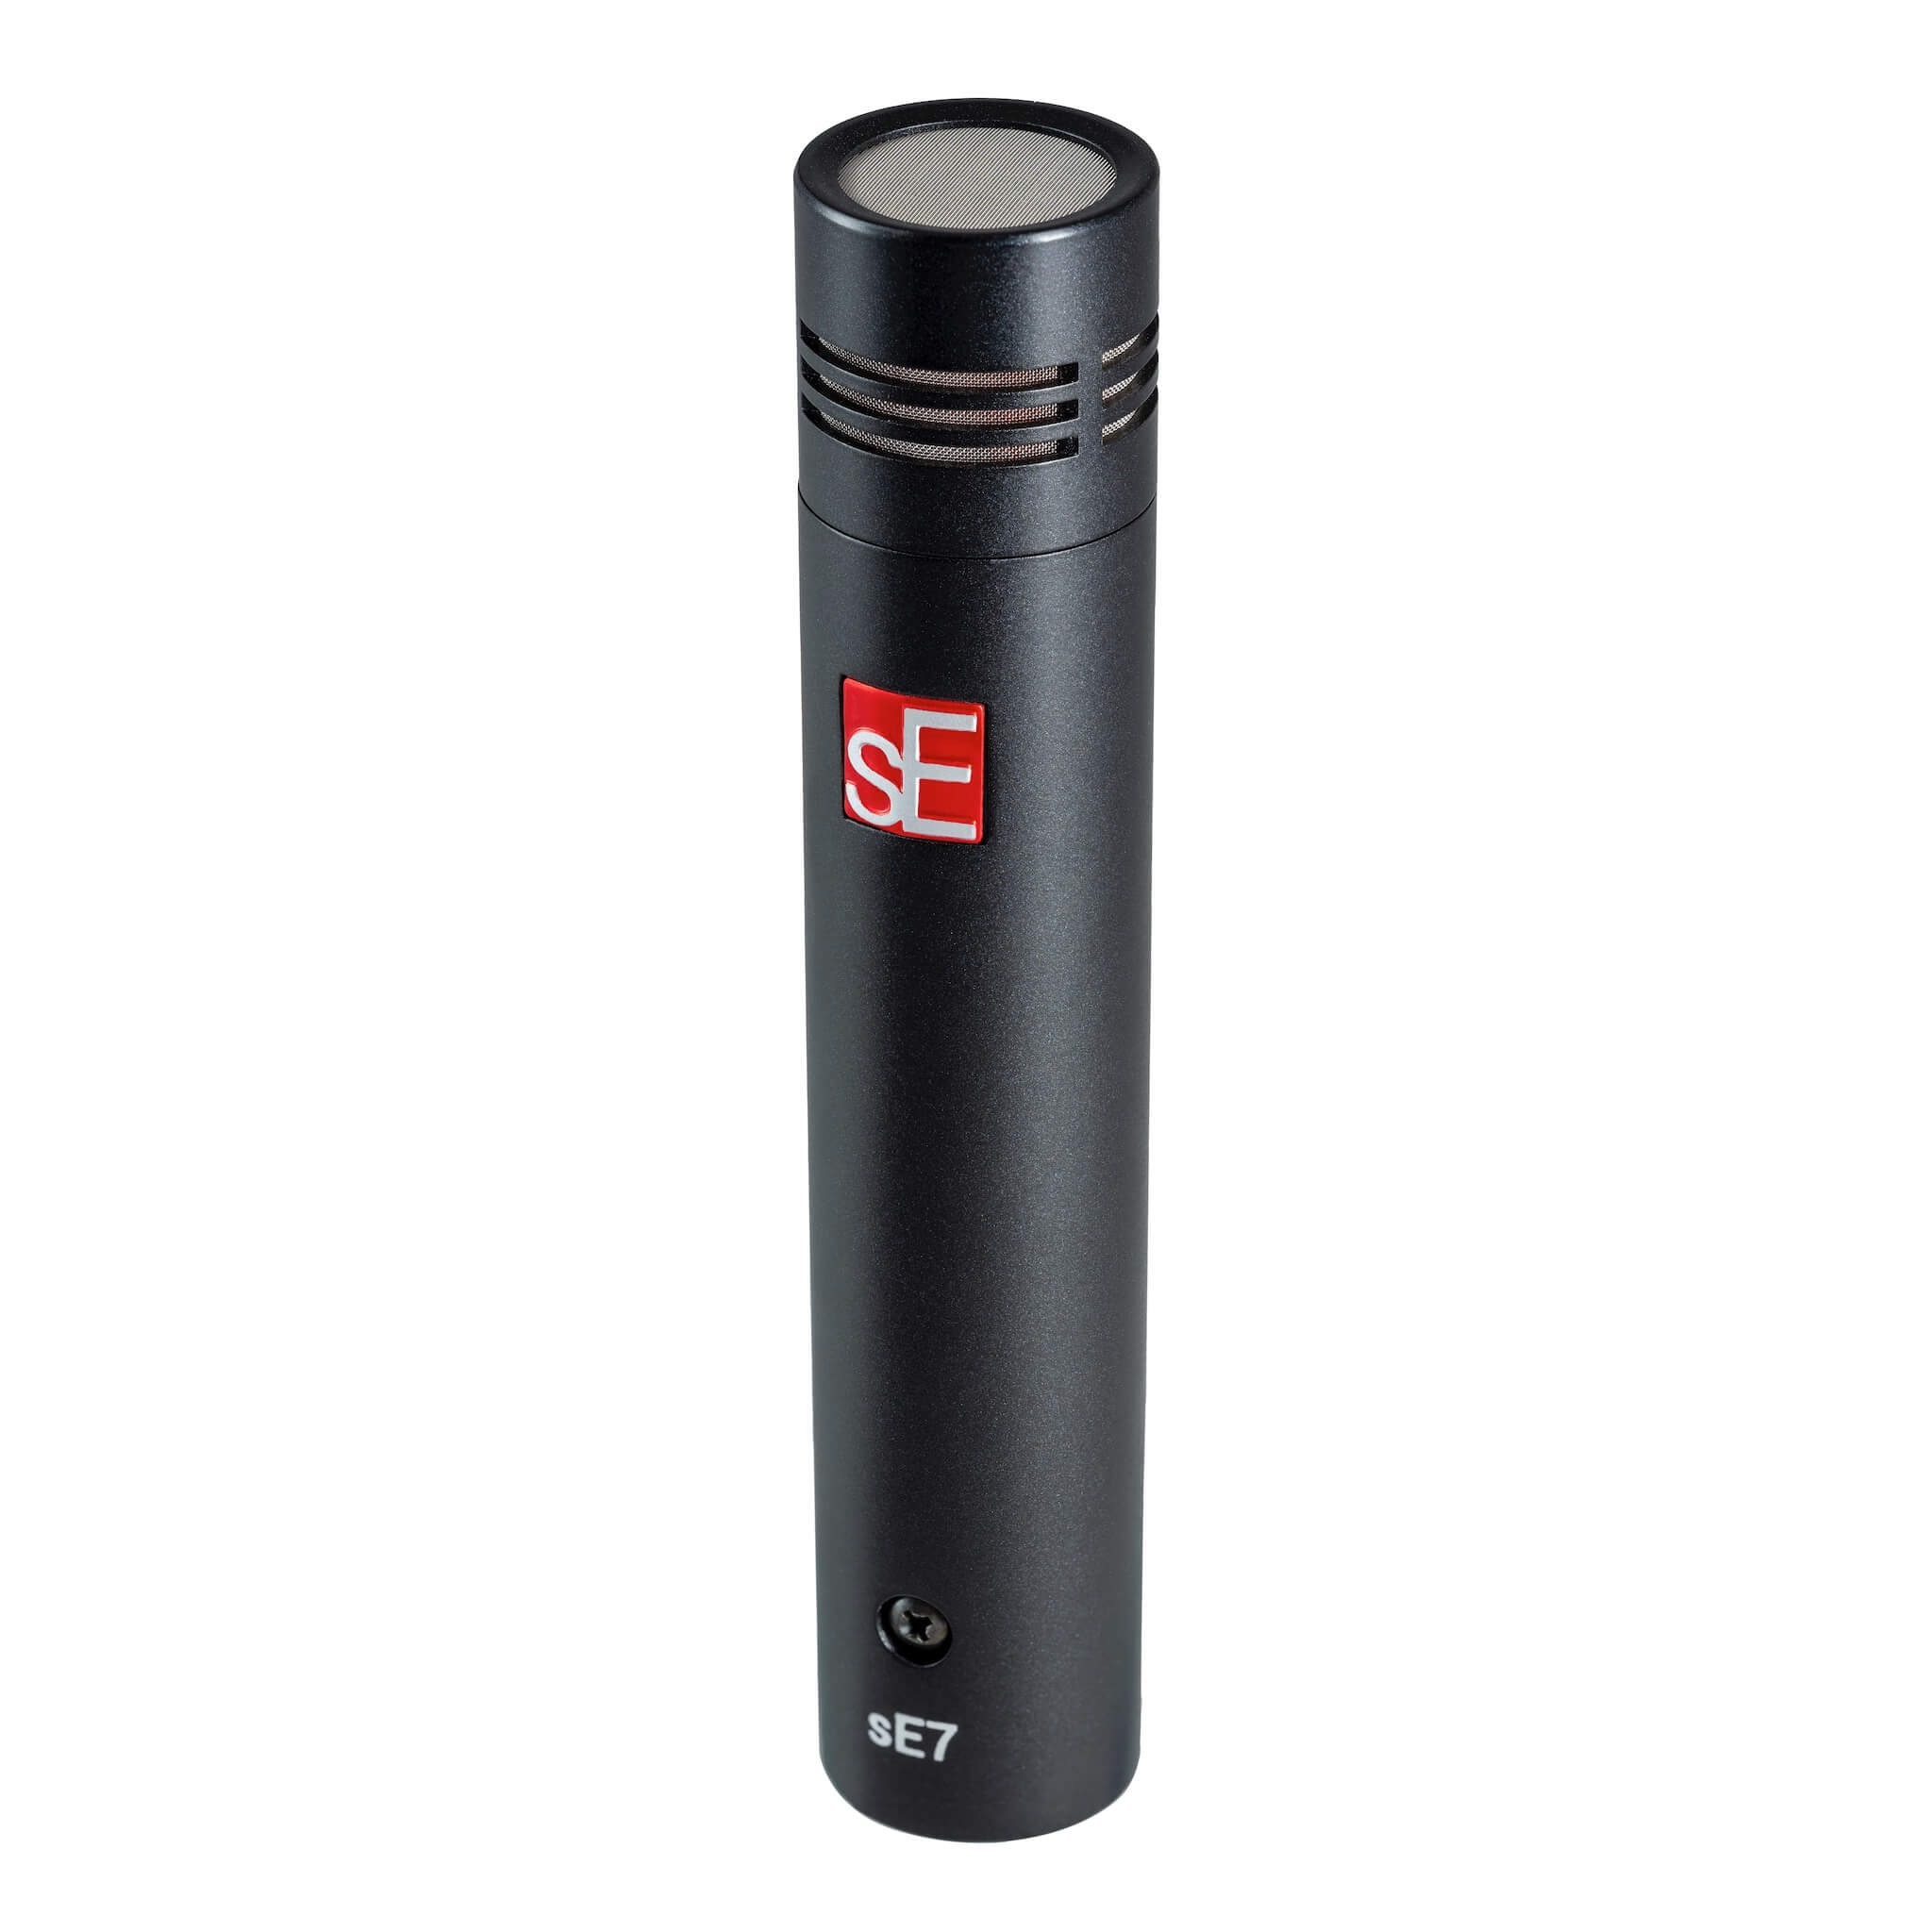 sE Electronics sE7 - Small Diaphragm Cardioid Condenser Microphone, angle